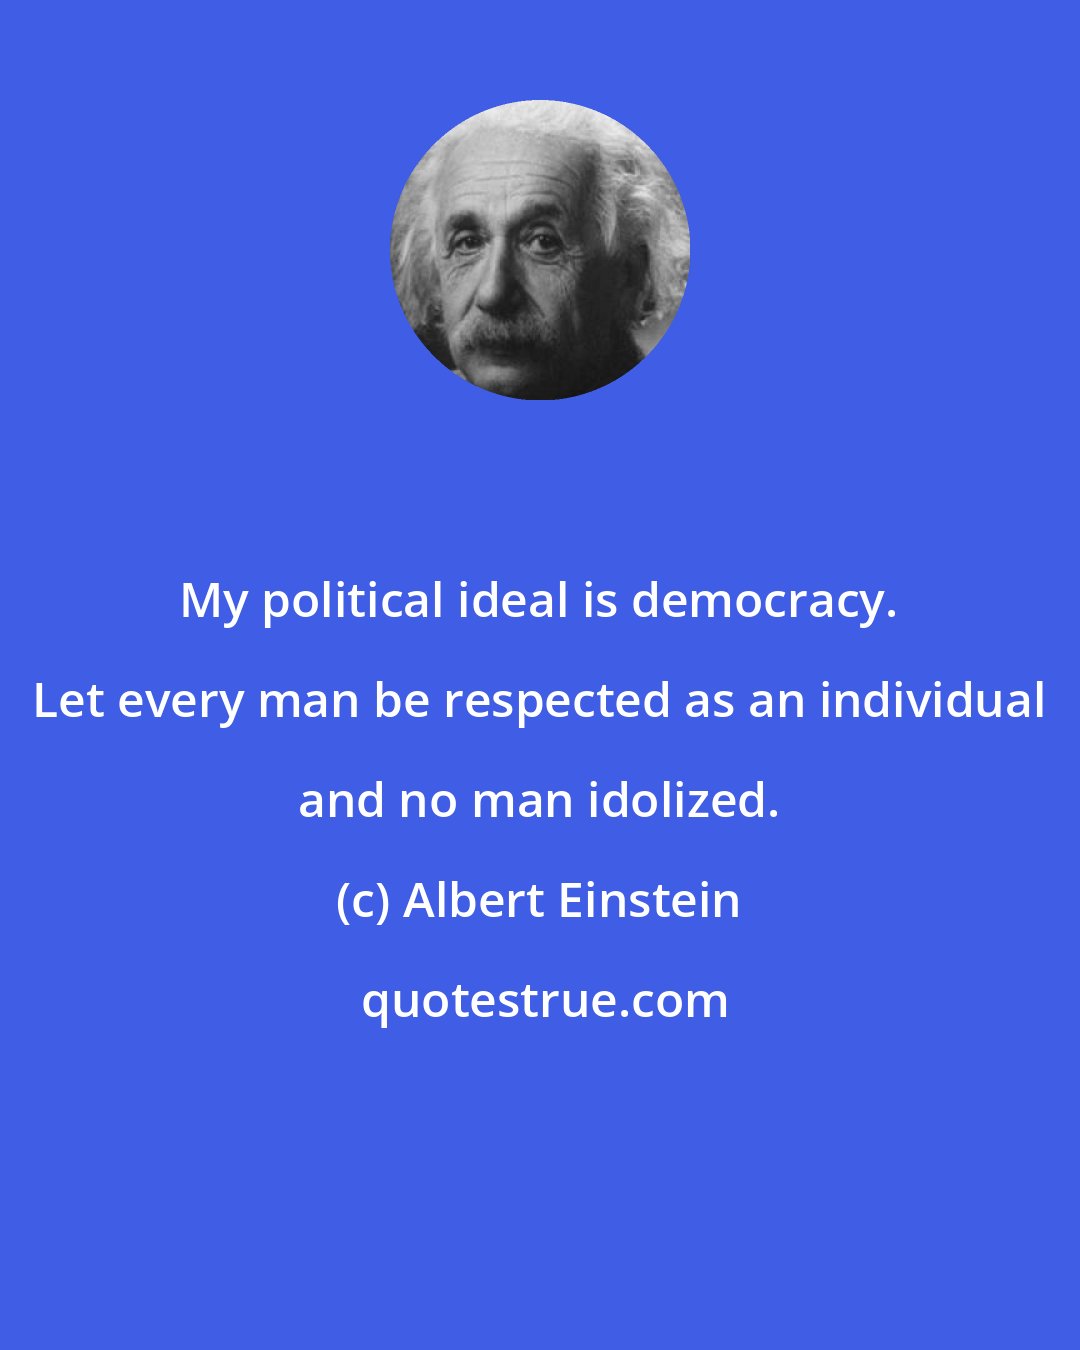 Albert Einstein: My political ideal is democracy. Let every man be respected as an individual and no man idolized.